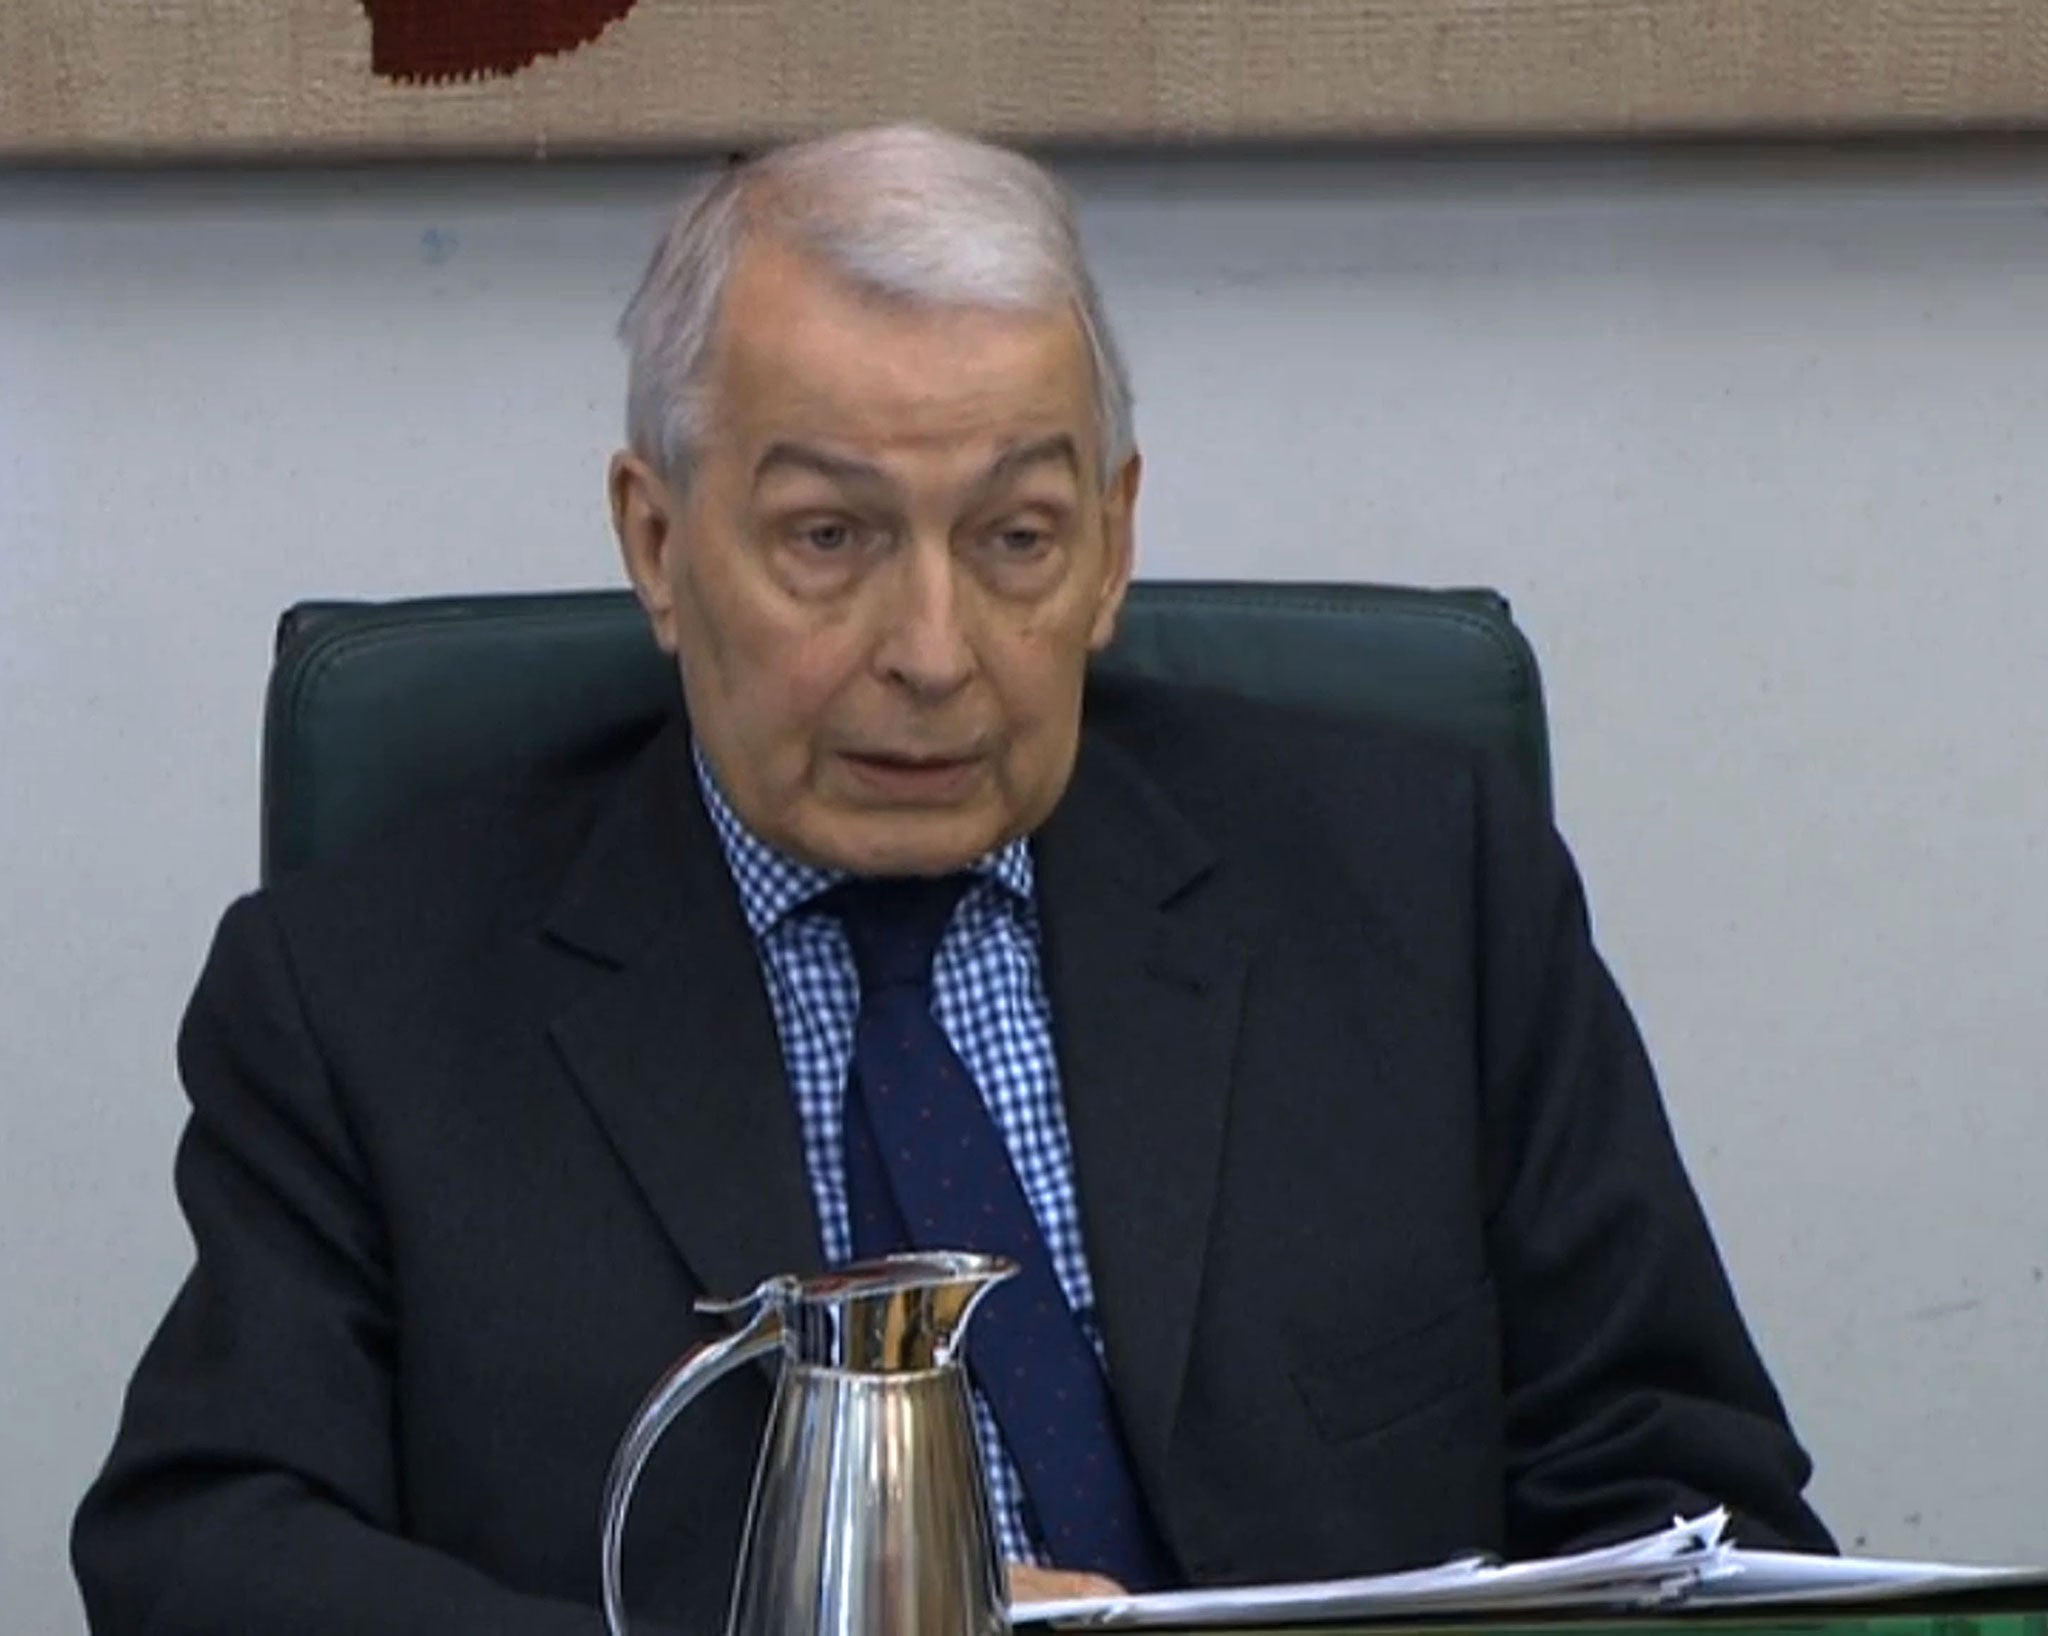 Frank Field MP said home ownership was out of reach for many young people